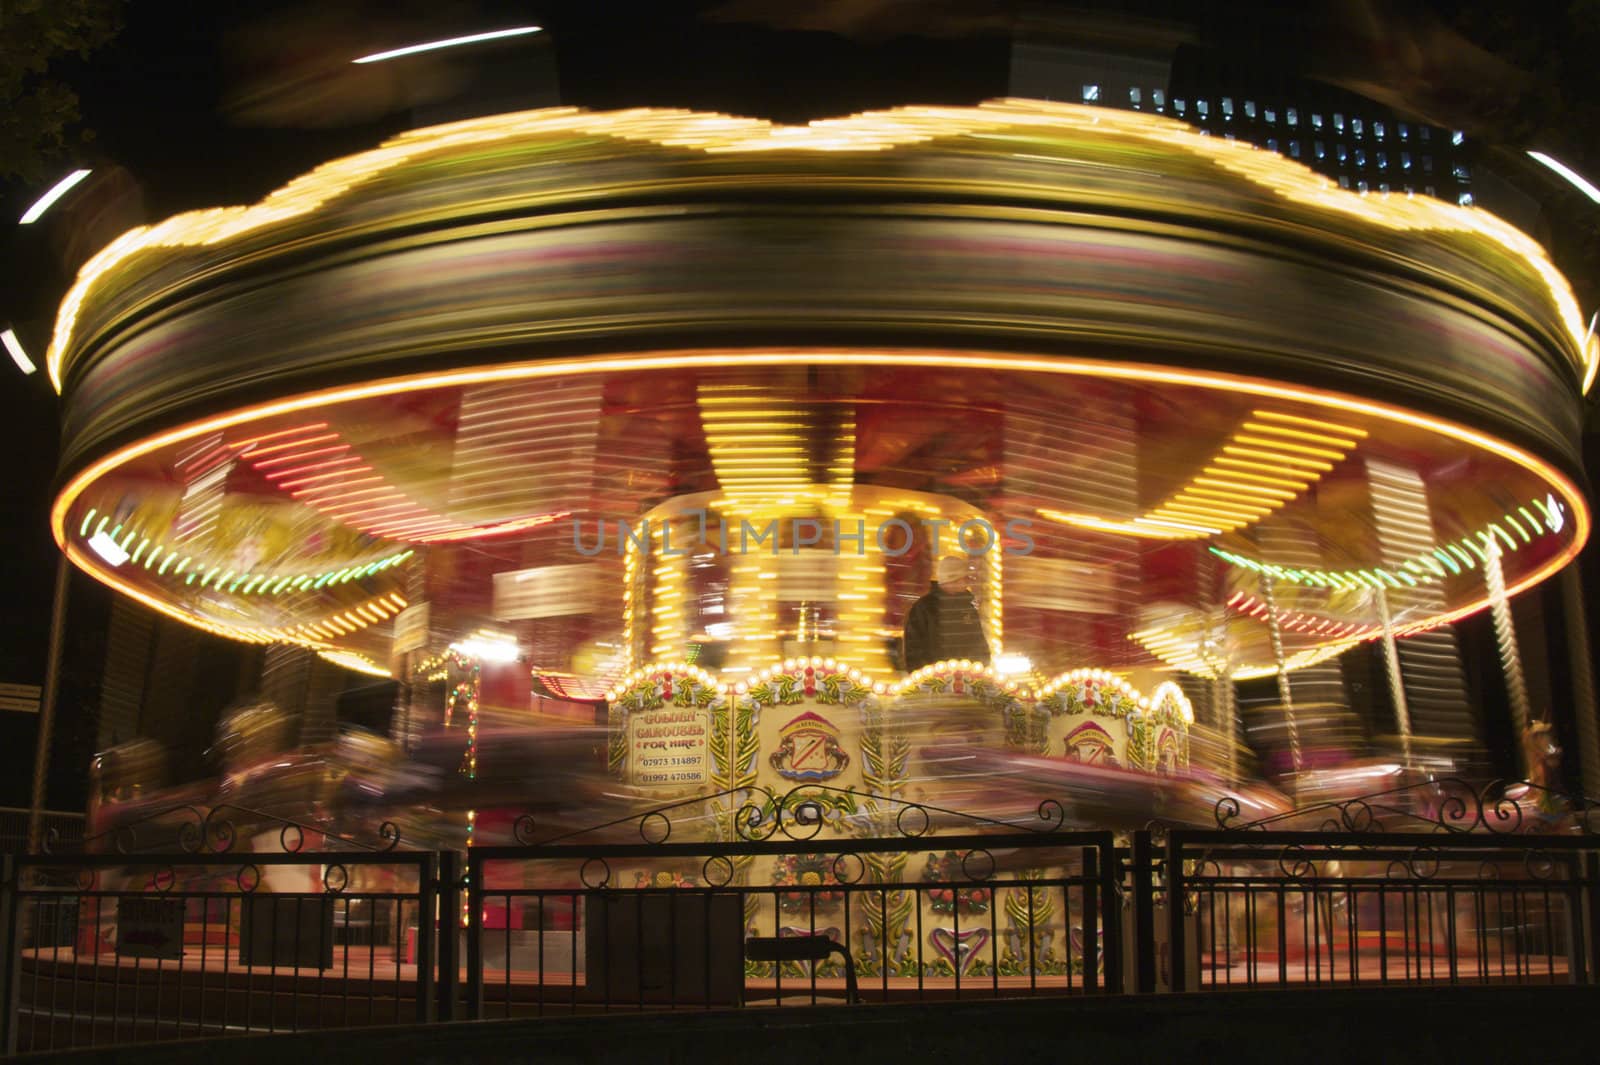 Fun of the Fair by alister